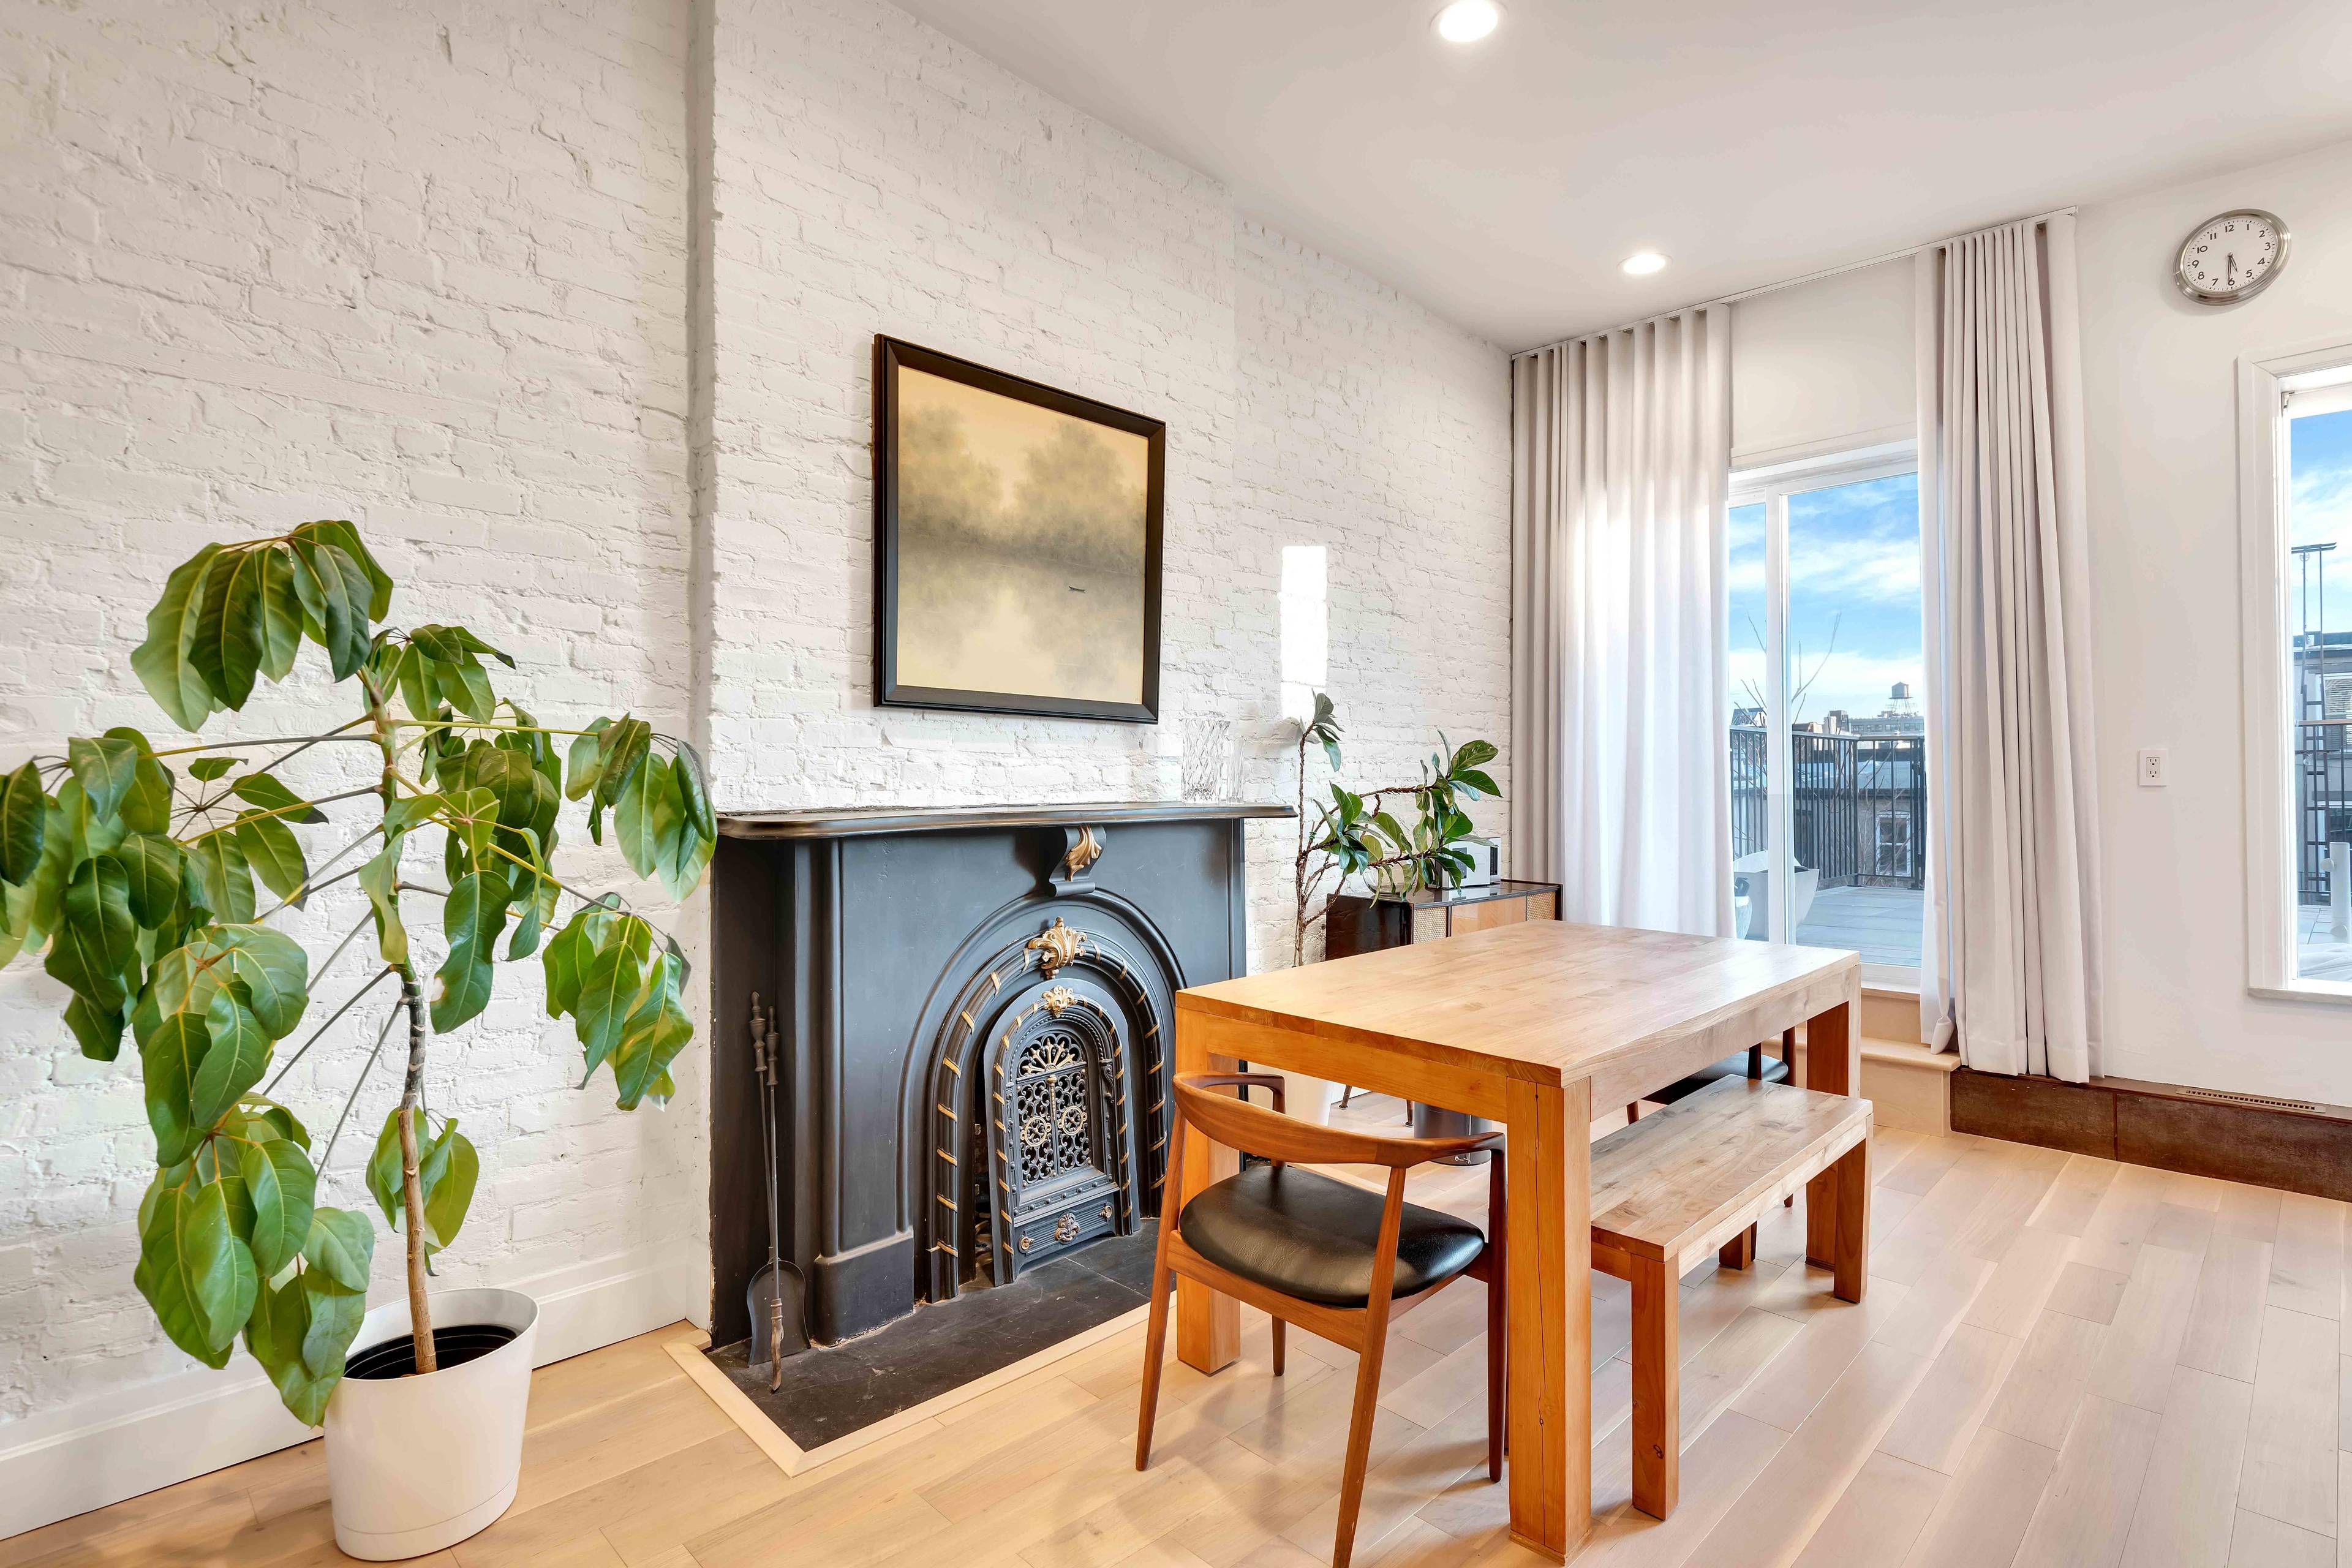 1 BR WITH STUDY AND LARGE PRIVATE DECK Enjoy the abundance of sunlight that radiates throughout this charming yet modern two bedroom home in Carroll Gardens.